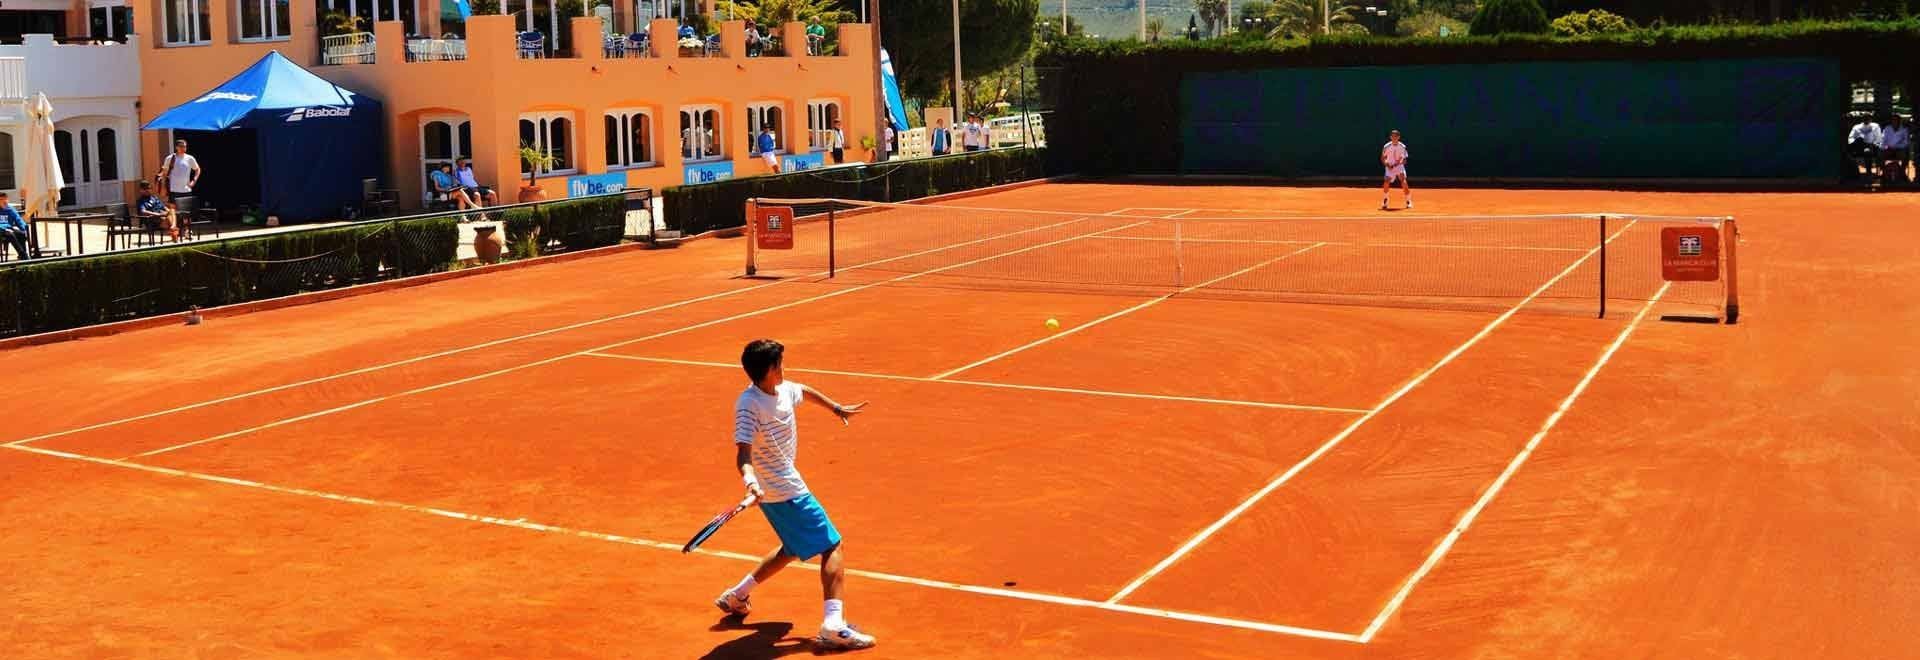 Junior Tennis Vacations And Holidays - Book tennis resorts and camps for your next Junior tennis vacation